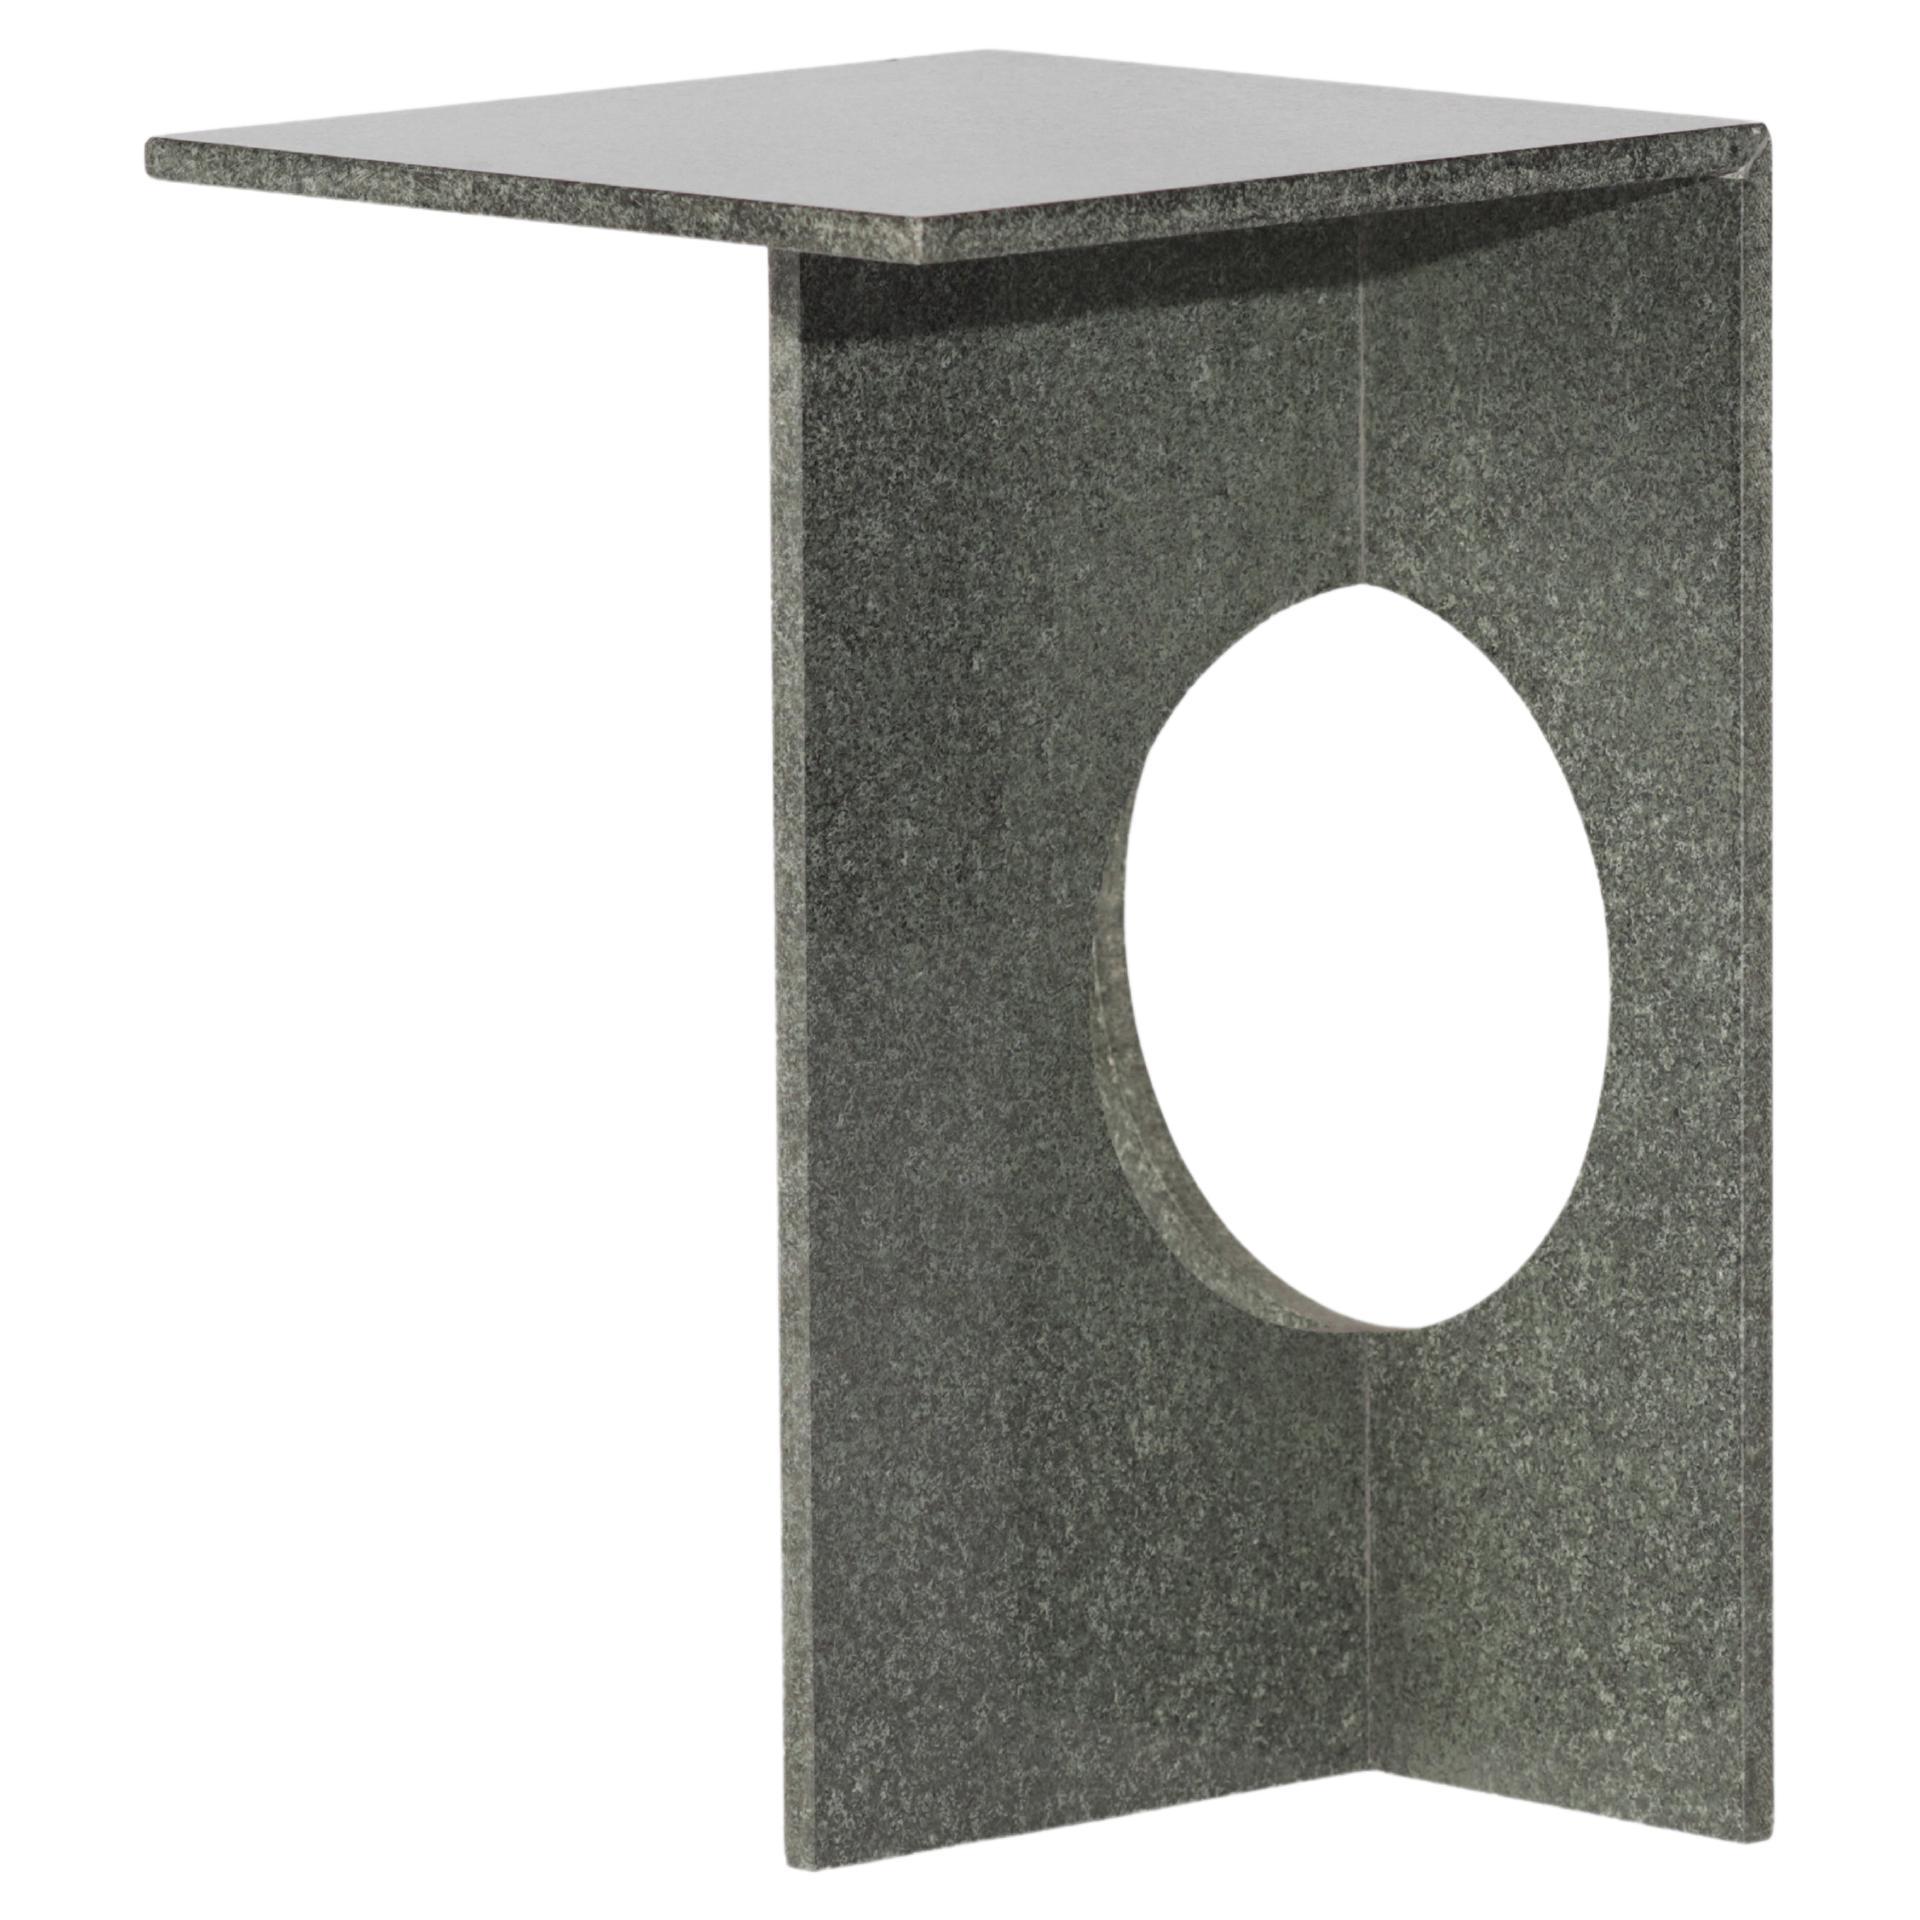 Ola Side Table, Polished Green Diabase Stone, Studio Mohs For Sale